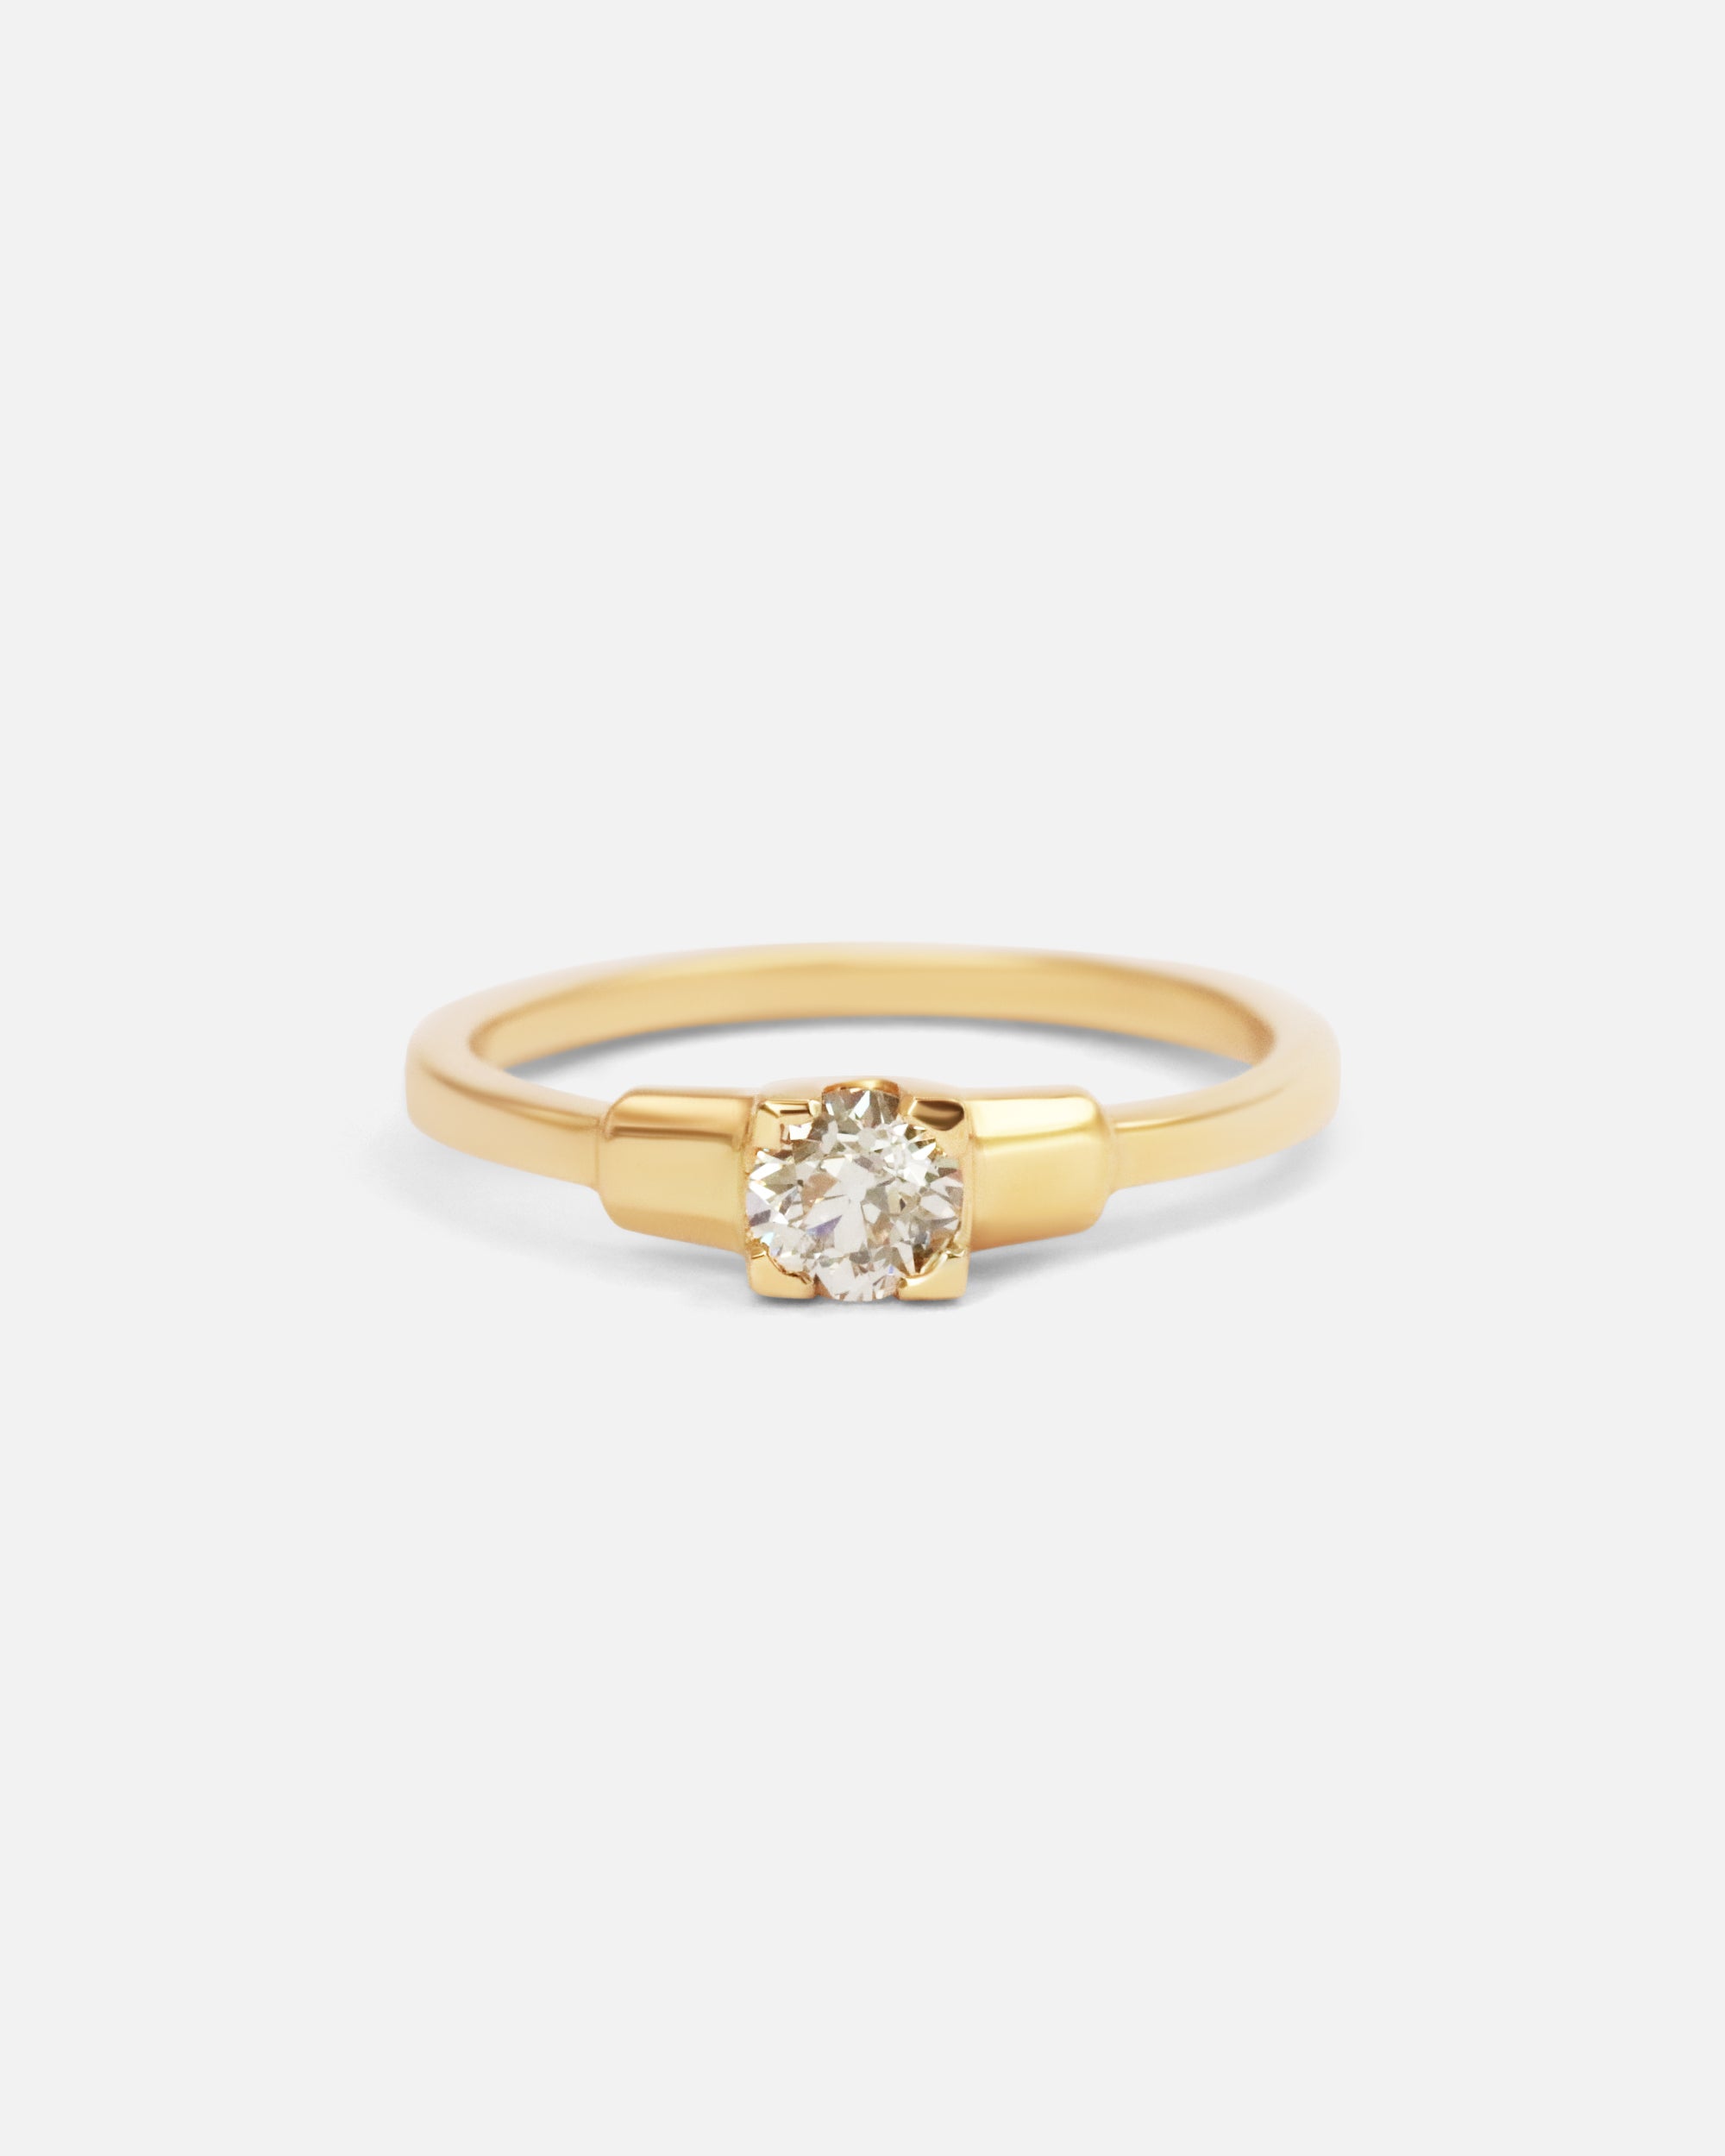 Frame Ring / Old Mine Diamond By Nishi in Engagement Rings Category